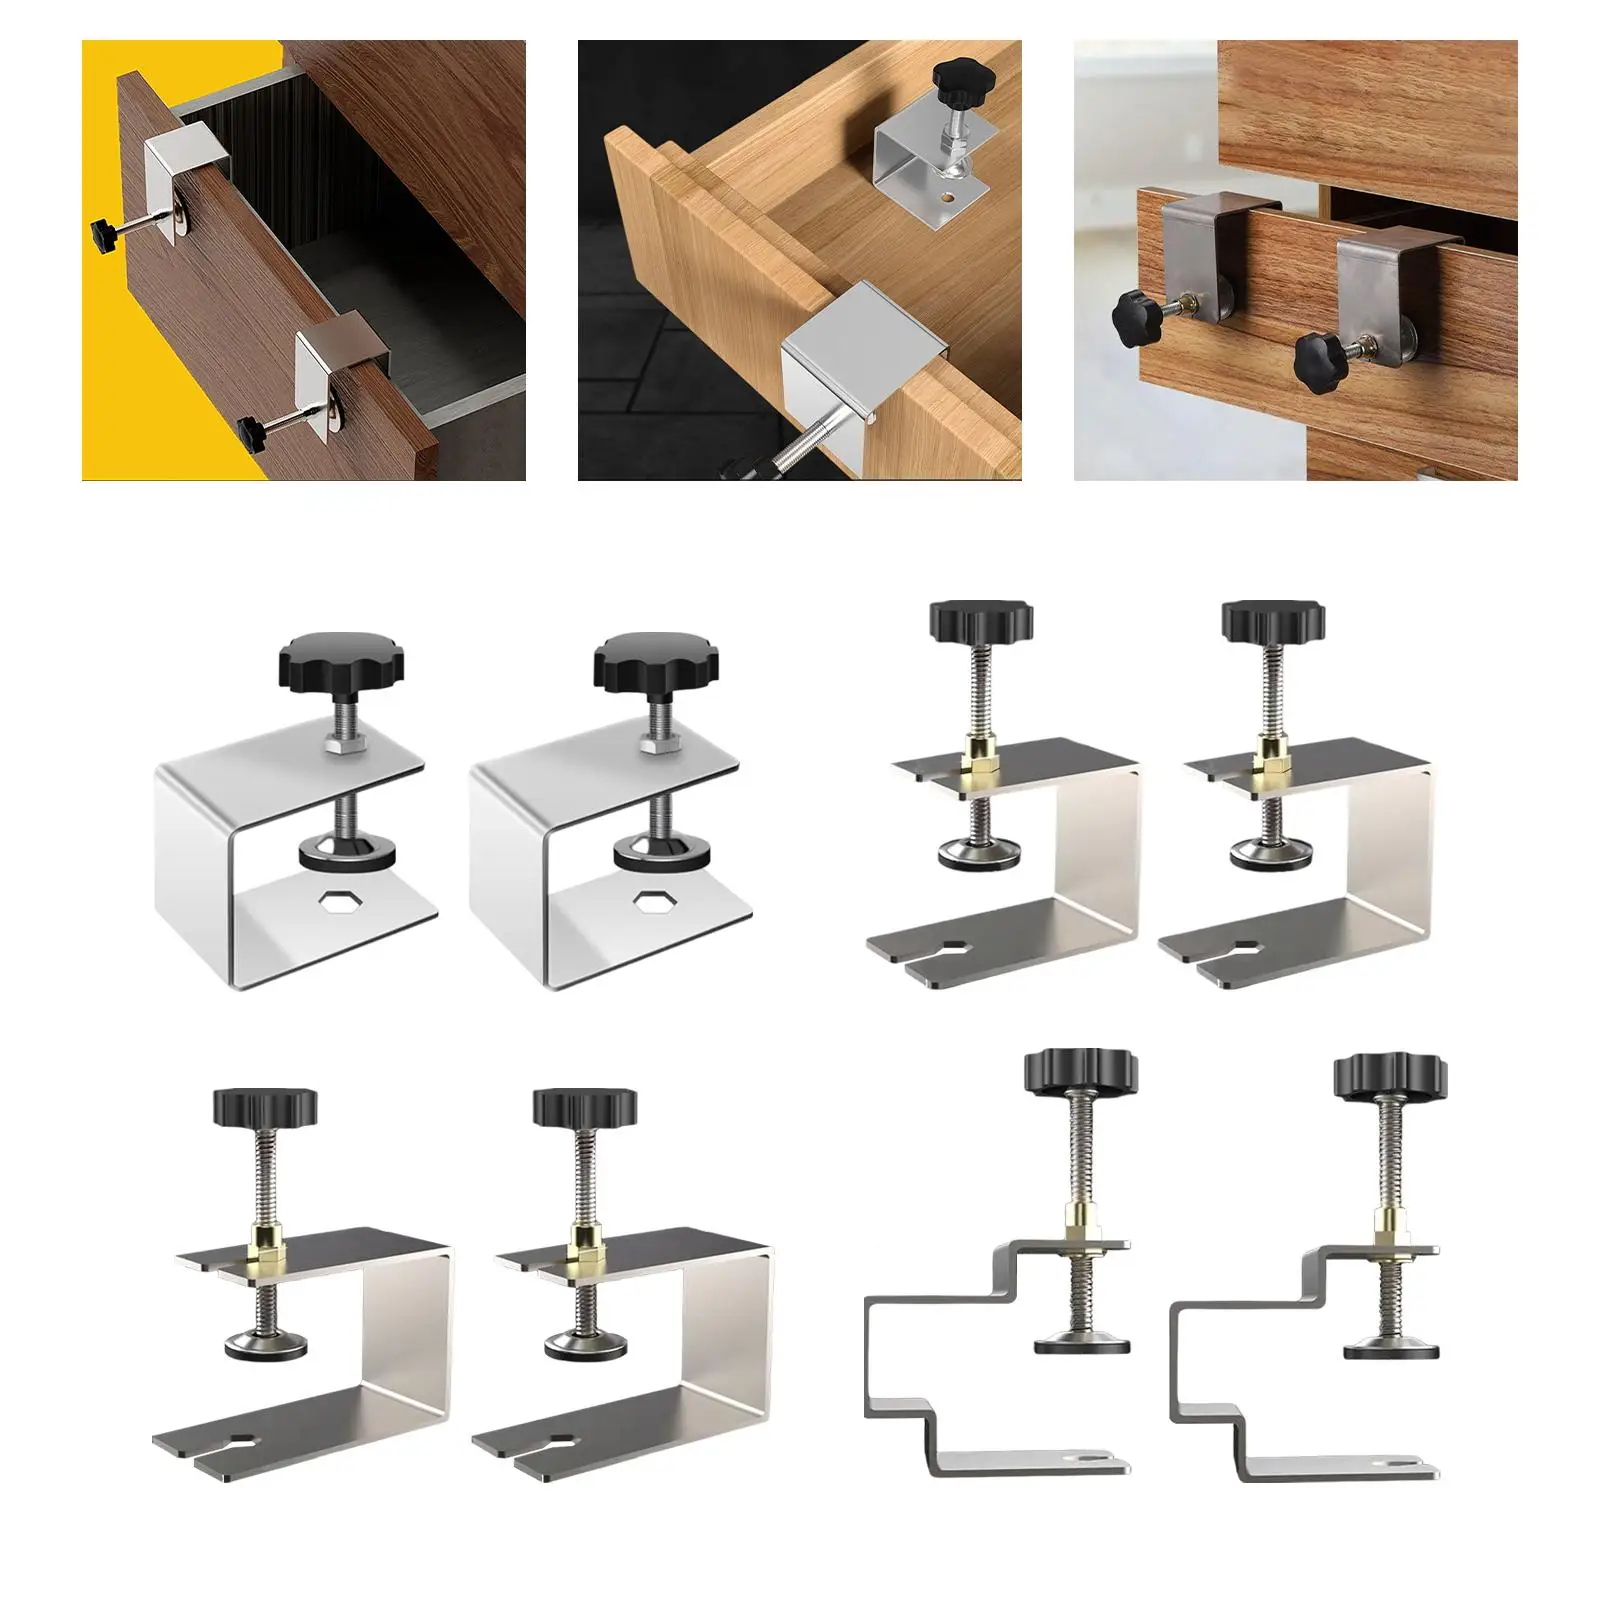 2x Stainless Steel Woodworking Clamp Drawer Front Installation Clamps Fixing Clip Fasten Stable Adjustment Hardware Smooth